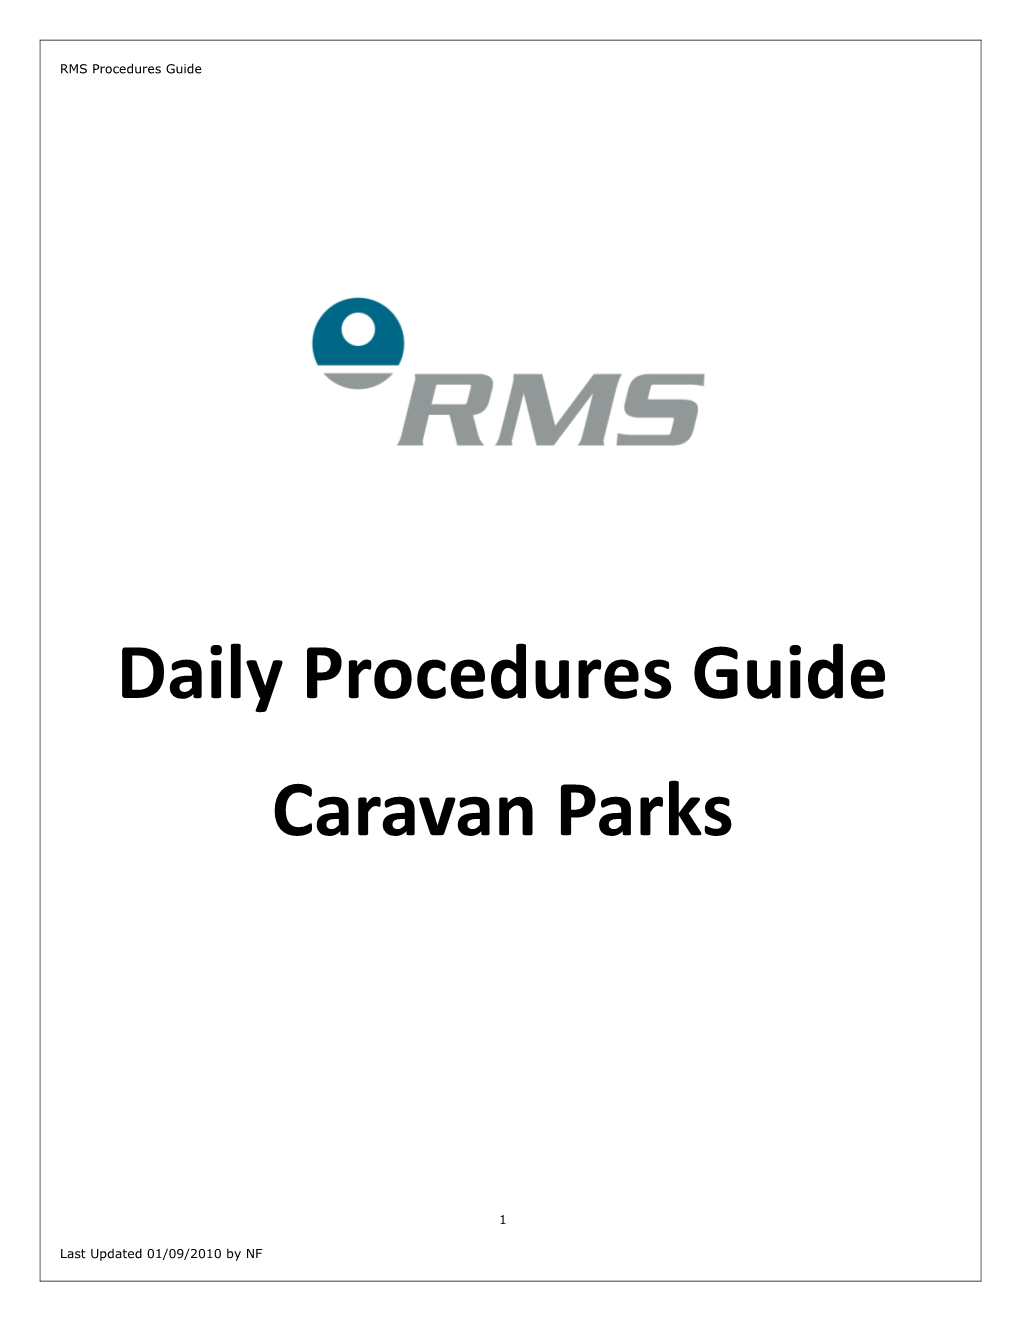 Daily Procedures Guide